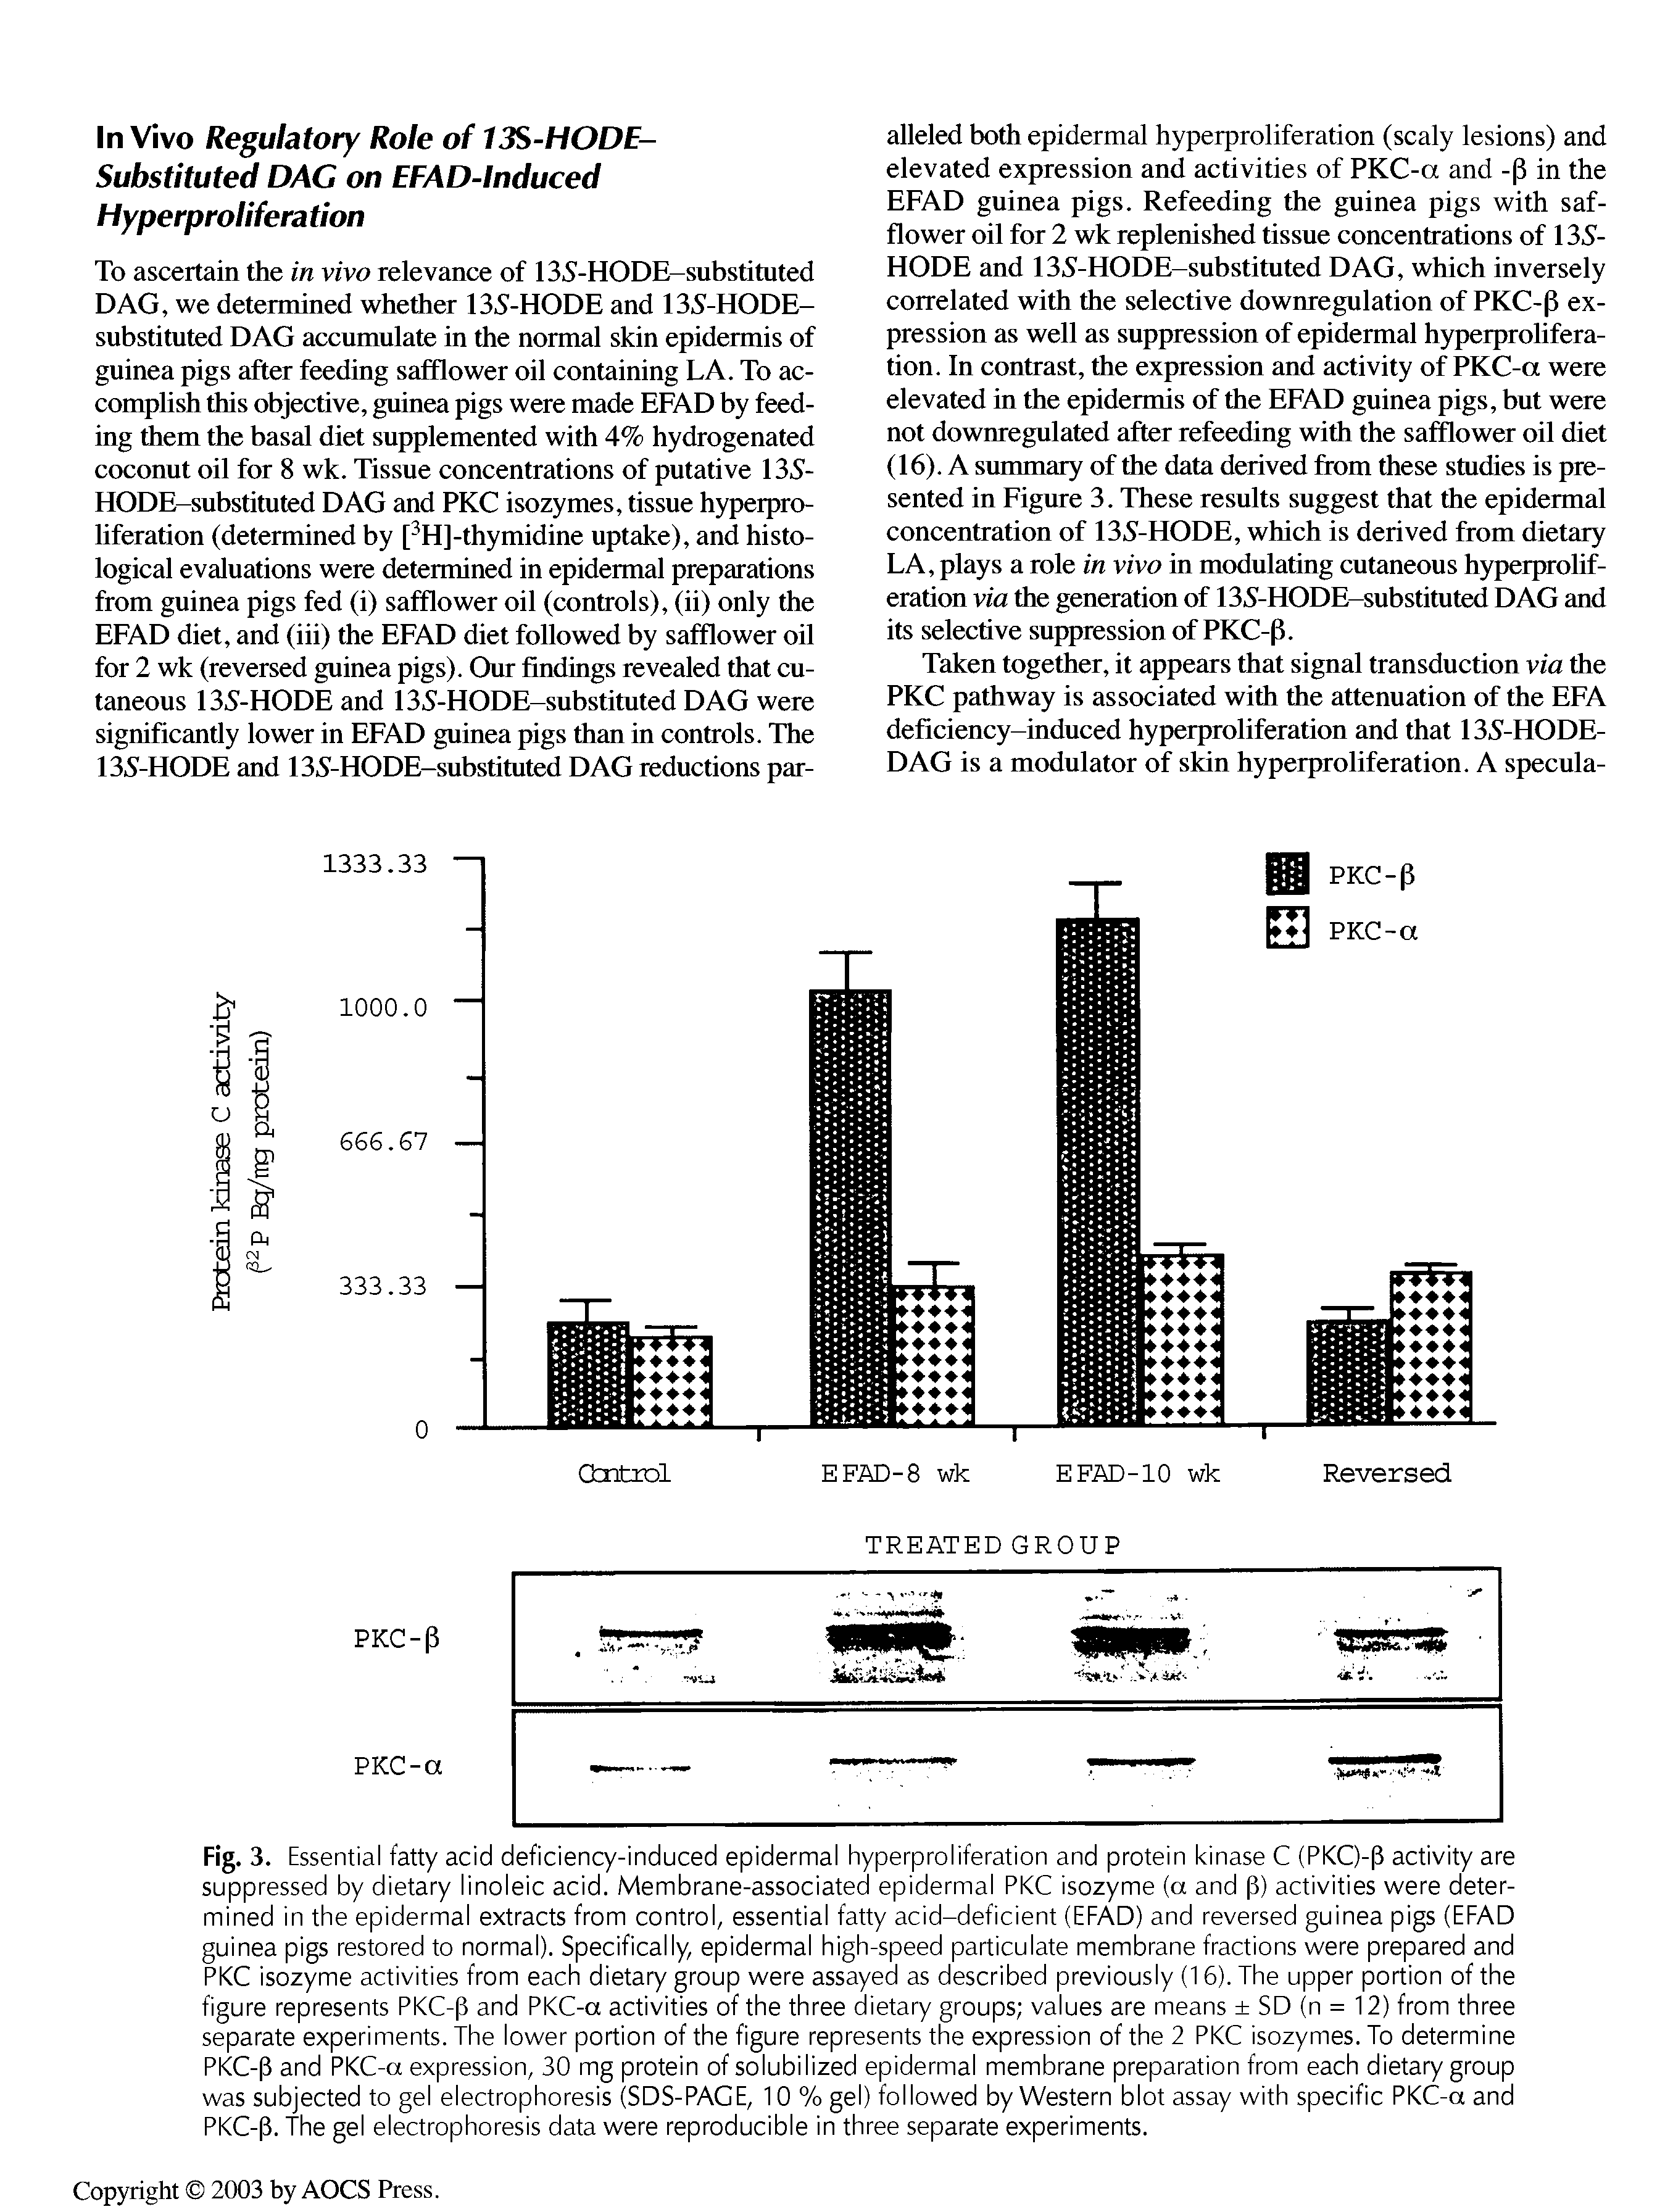 Fig. 3. Essential fatty acid deficiency-induced epidermal hyperproliferation and protein kinase C (PKC)-P activity are suppressed by dietary linoleic acid. Membrane-associated epidermal PKC isozyme (a and p) activities were determined in the epidermal extracts from control, essential fatty acid-deficient (EFAD) and reversed guinea pigs (EFAD guinea pigs restored to normal). Specifically, epidermal high-speed particulate membrane fractions were prepared and PKC isozyme activities from each dietary group were assayed as described previously (16). The upper portion of the figure represents PKC-p and PKC-a activities of the three dietary groups values are means SD (n = 12) from three separate experiments. The lower portion of the figure represents the expression of the 2 PKC isozymes. To determine PKC-P and PKC-a expression, 30 mg protein of solubilized epidermal membrane preparation from each dietary group was subjected to gel electrophoresis (SDS-PACE, 10 % gel) followed by Western blot assay with specific PKC-a and PKC-p. The gel electrophoresis data were reproducible in three separate experiments.